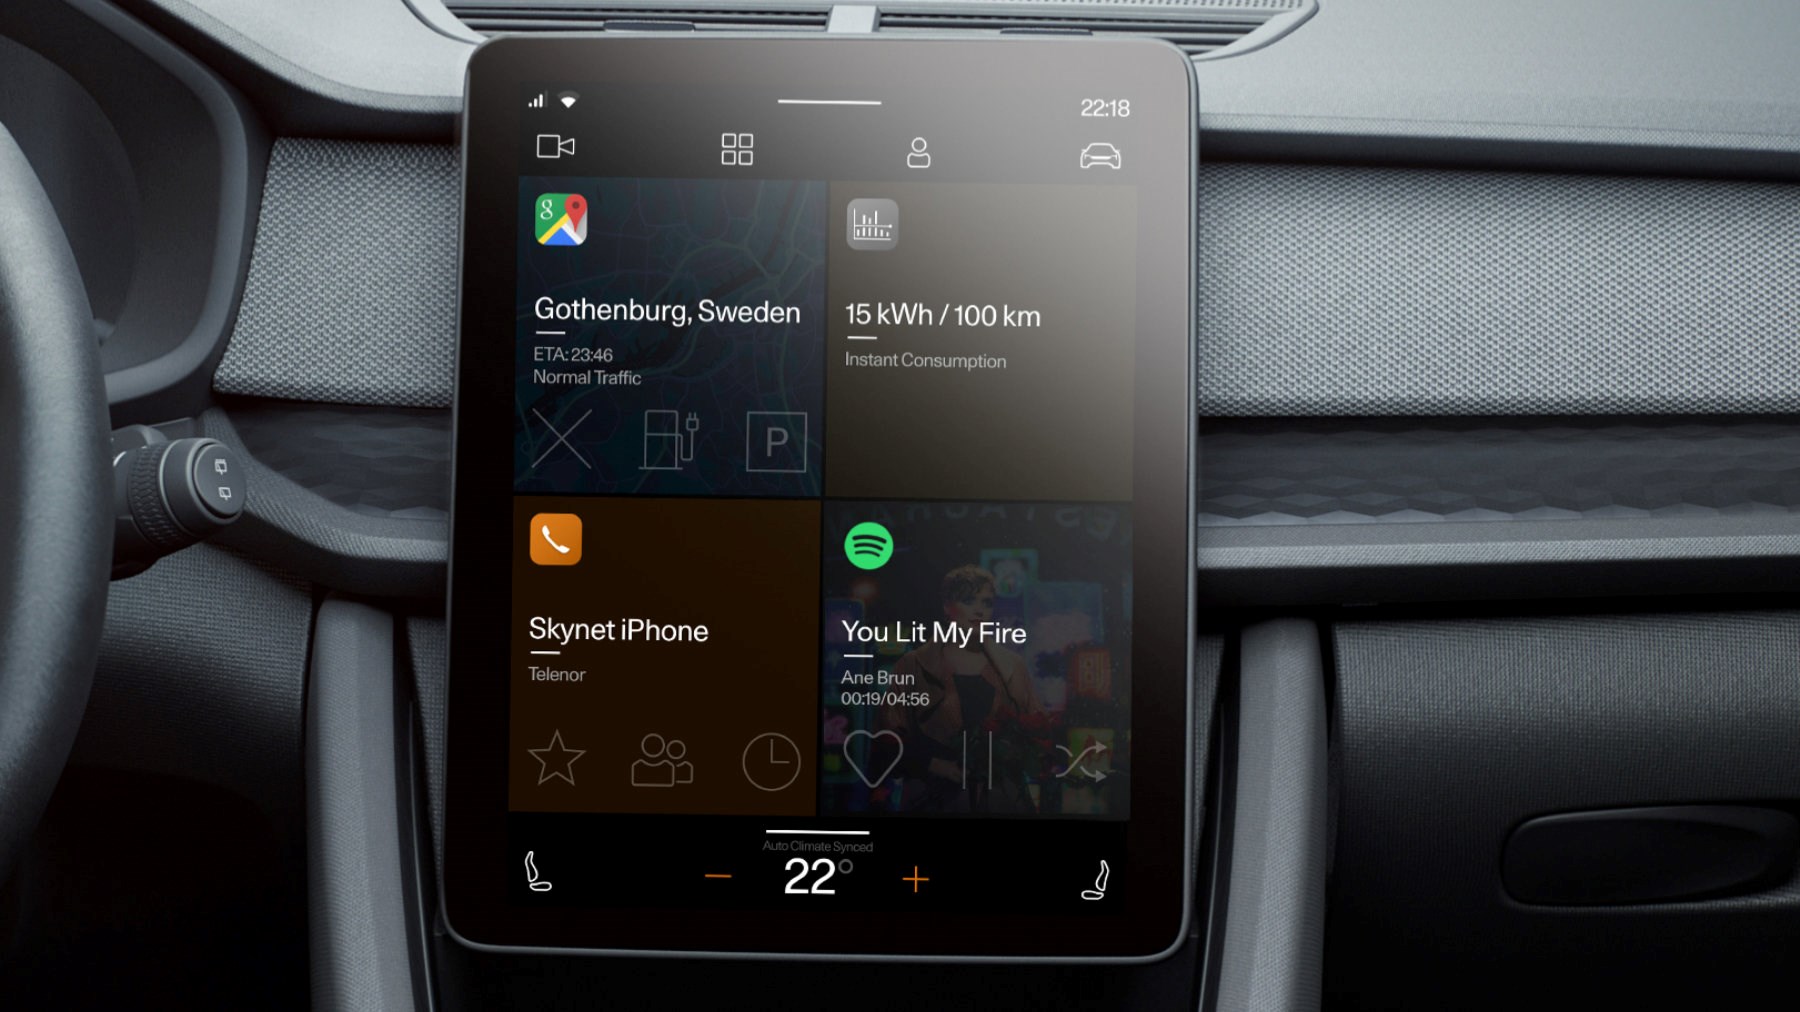 How to use Apple CarPlay in your Toyota - Toyota UK Magazine